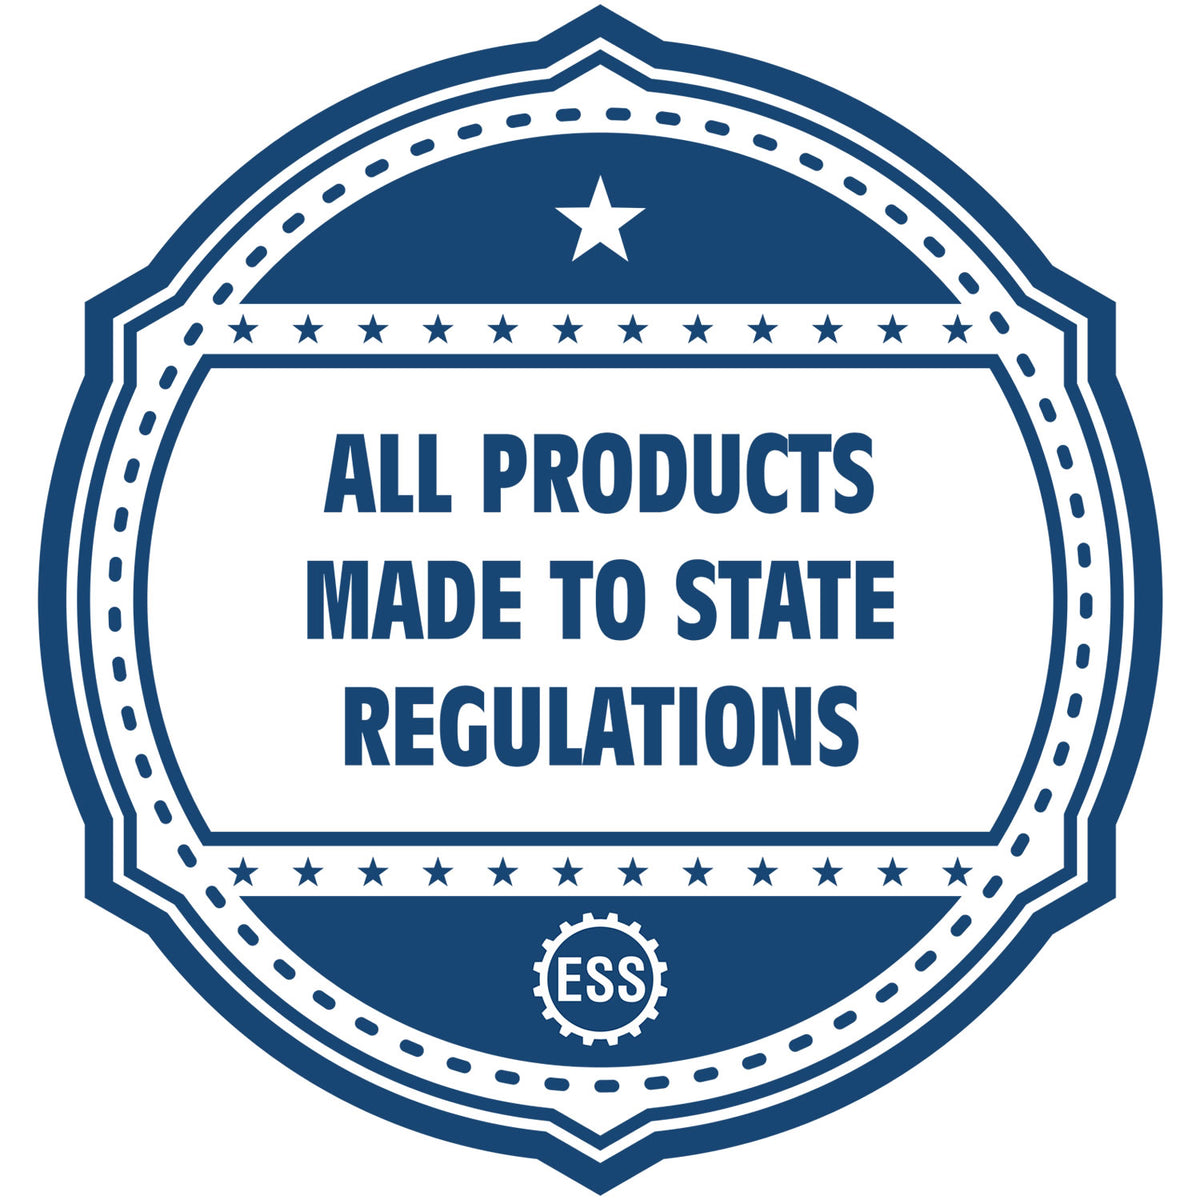 An icon or badge element for the Slim Pre-Inked Alaska Landscape Architect Seal Stamp showing that this product is made in compliance with state regulations.